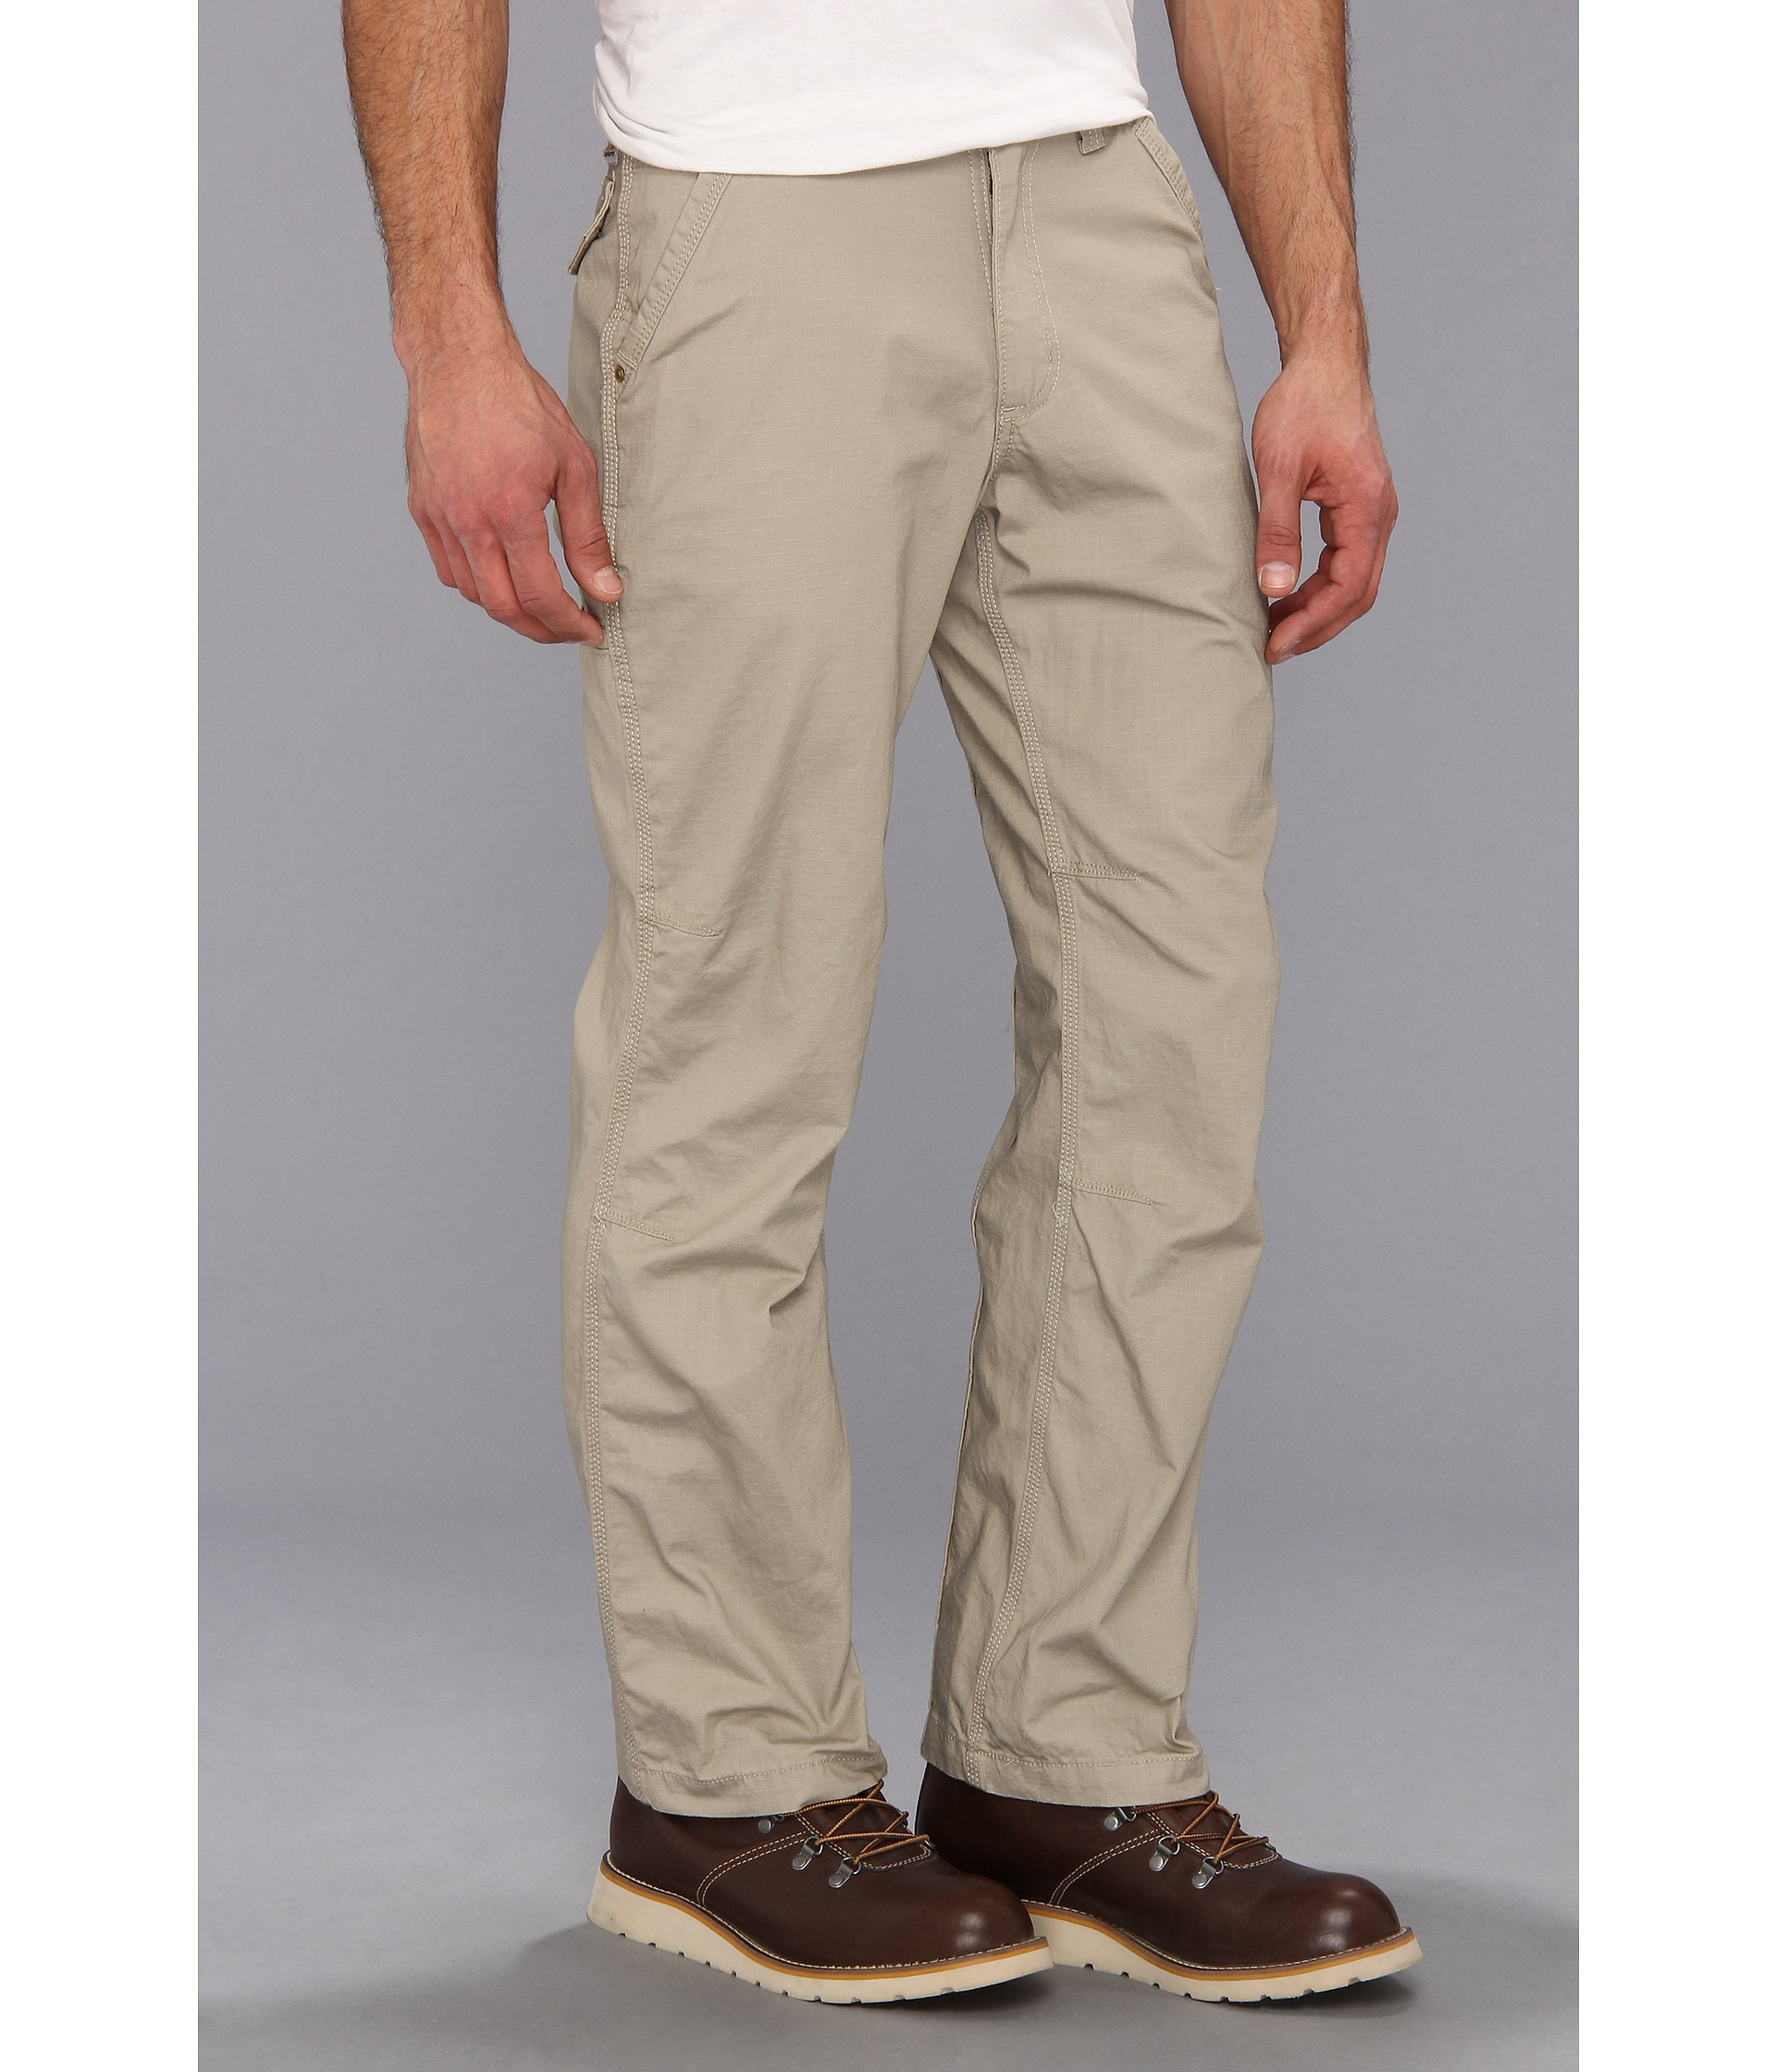 Lyst - Carhartt Tacoma Ripstop Pant in Brown for Men